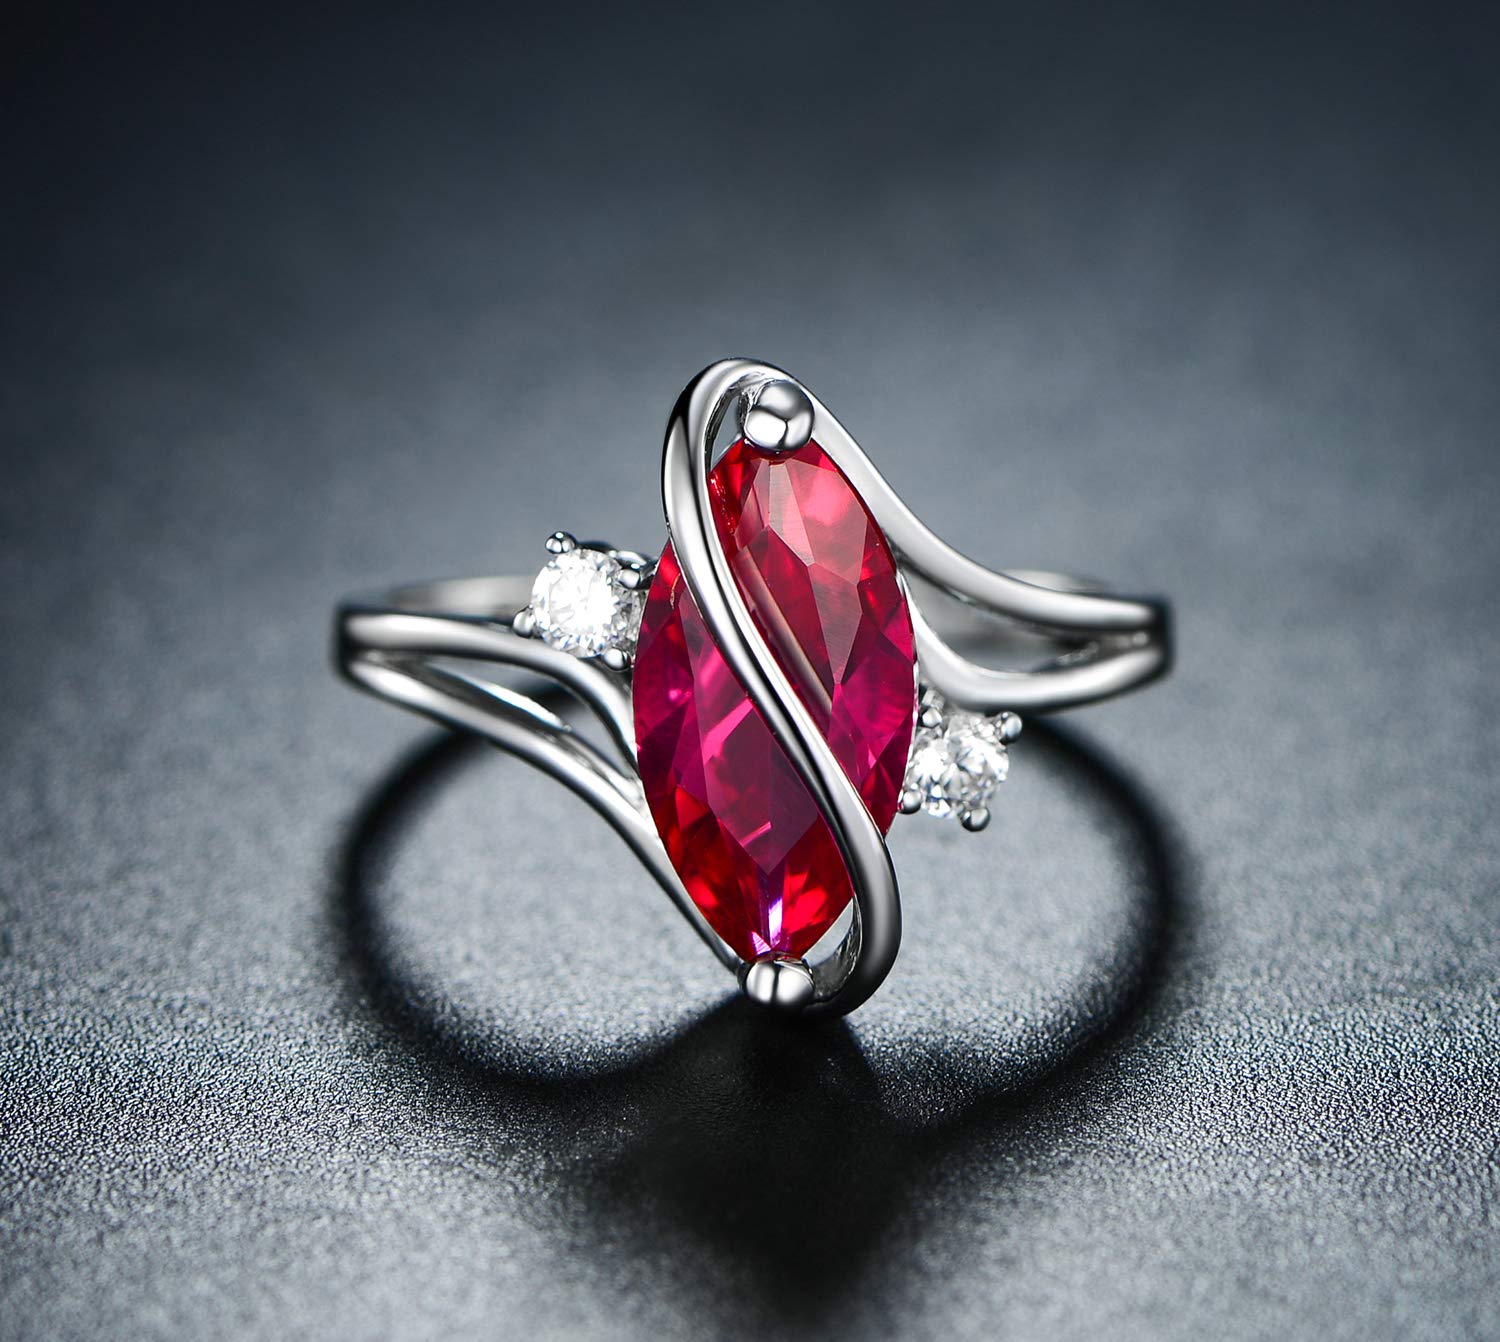 18K White Gold Plated Oval Ruby S Ring with Cubic Zirconia Accents